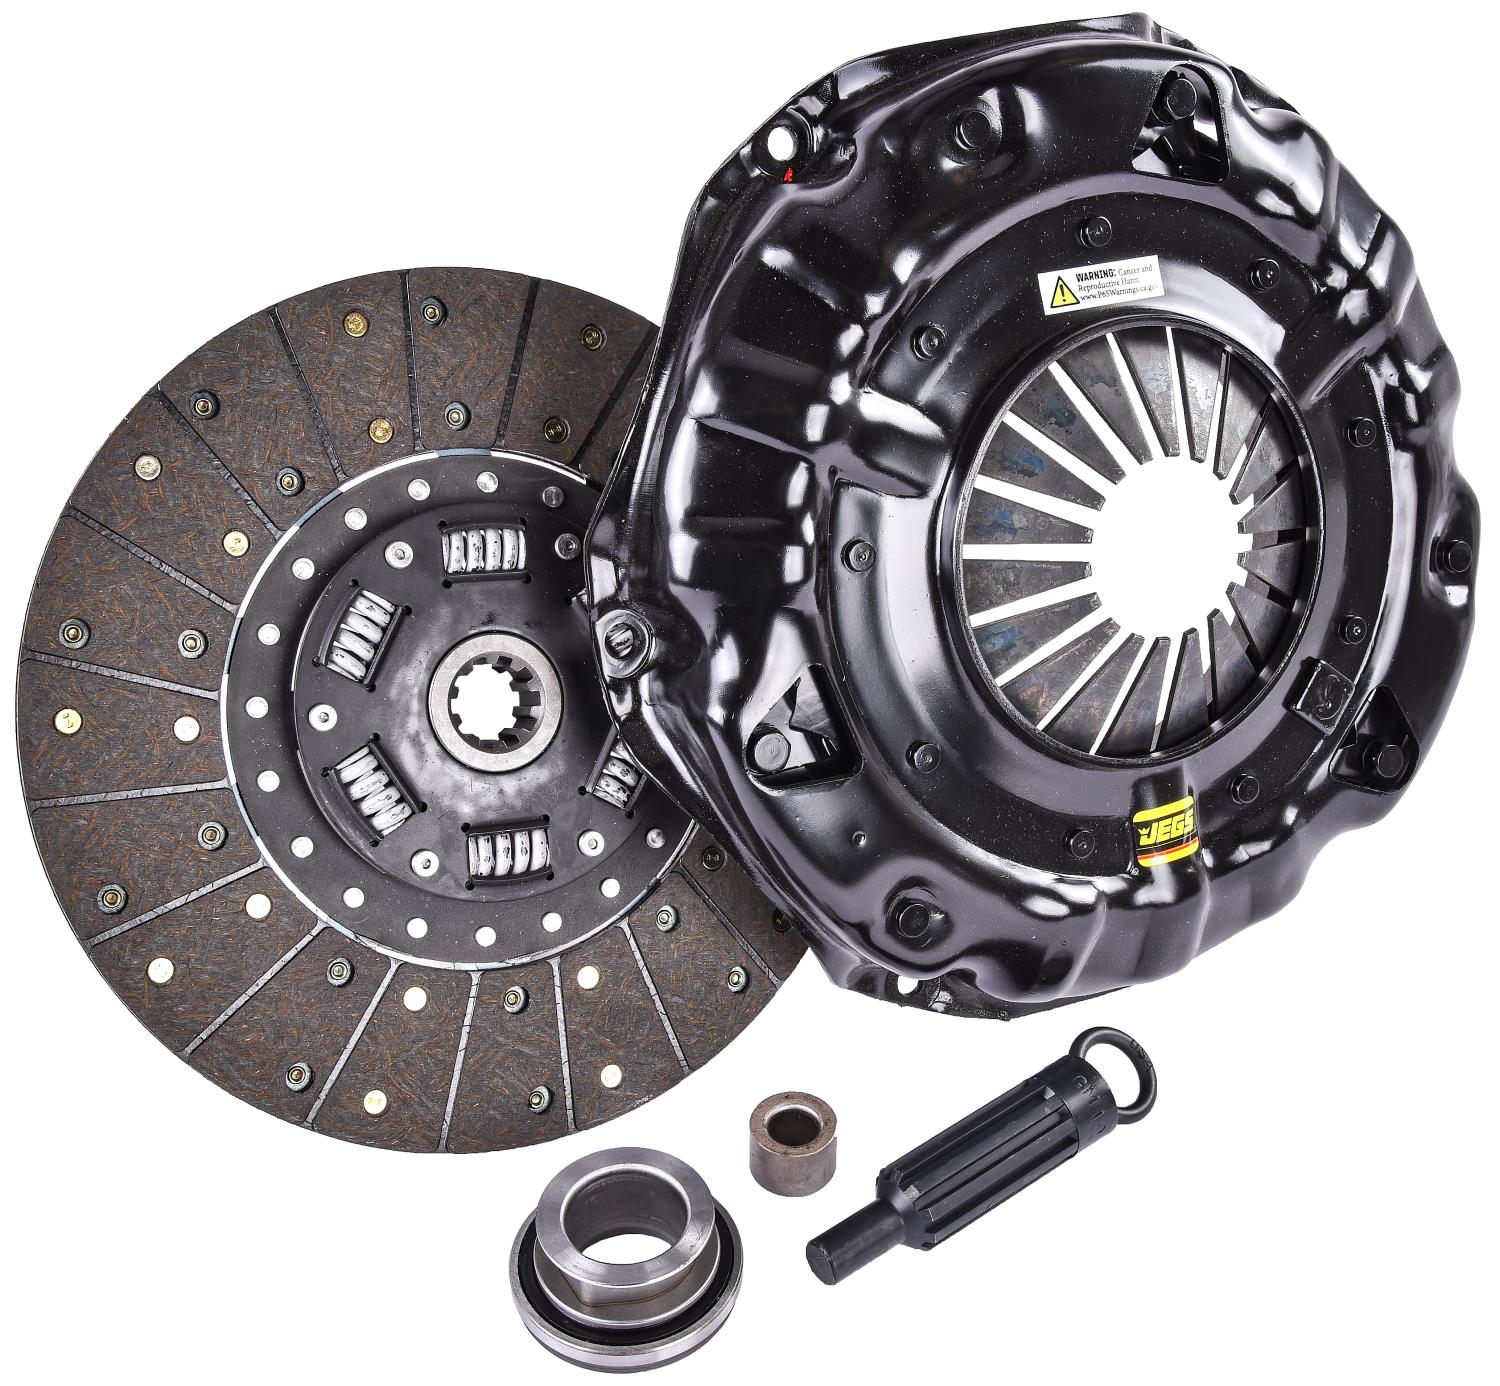 Street Performance Clutch Kit for Select 1959-1990 GM Models with a V8 Engine [11 in. Dia., 1 1/8 in. x 10-Spline]